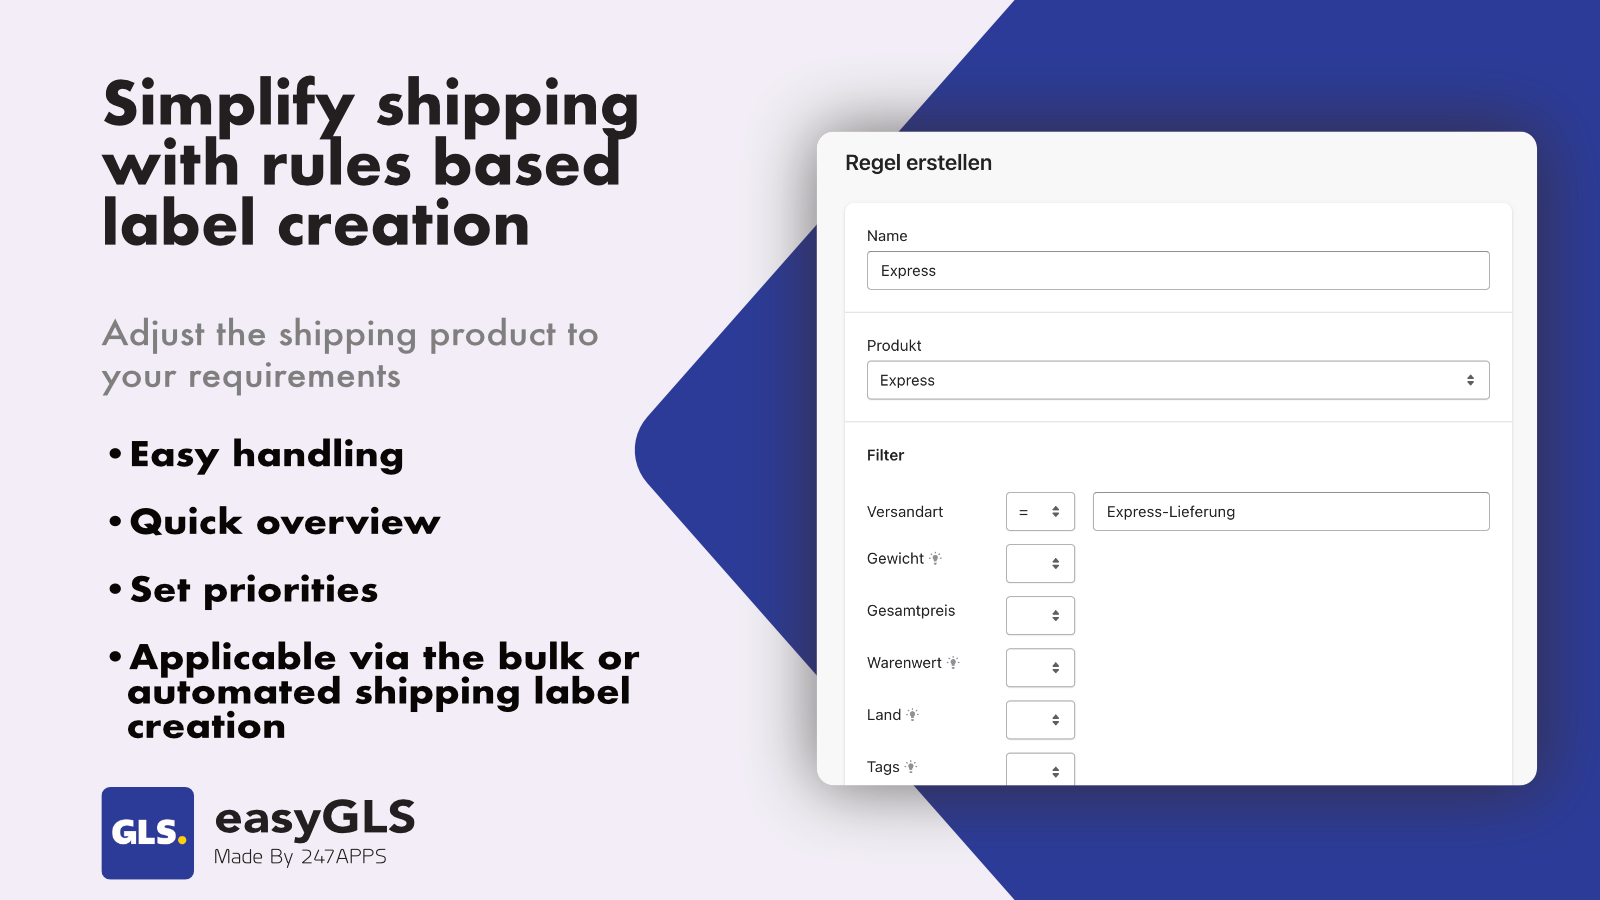 Simplify the shipping with rule based label creation